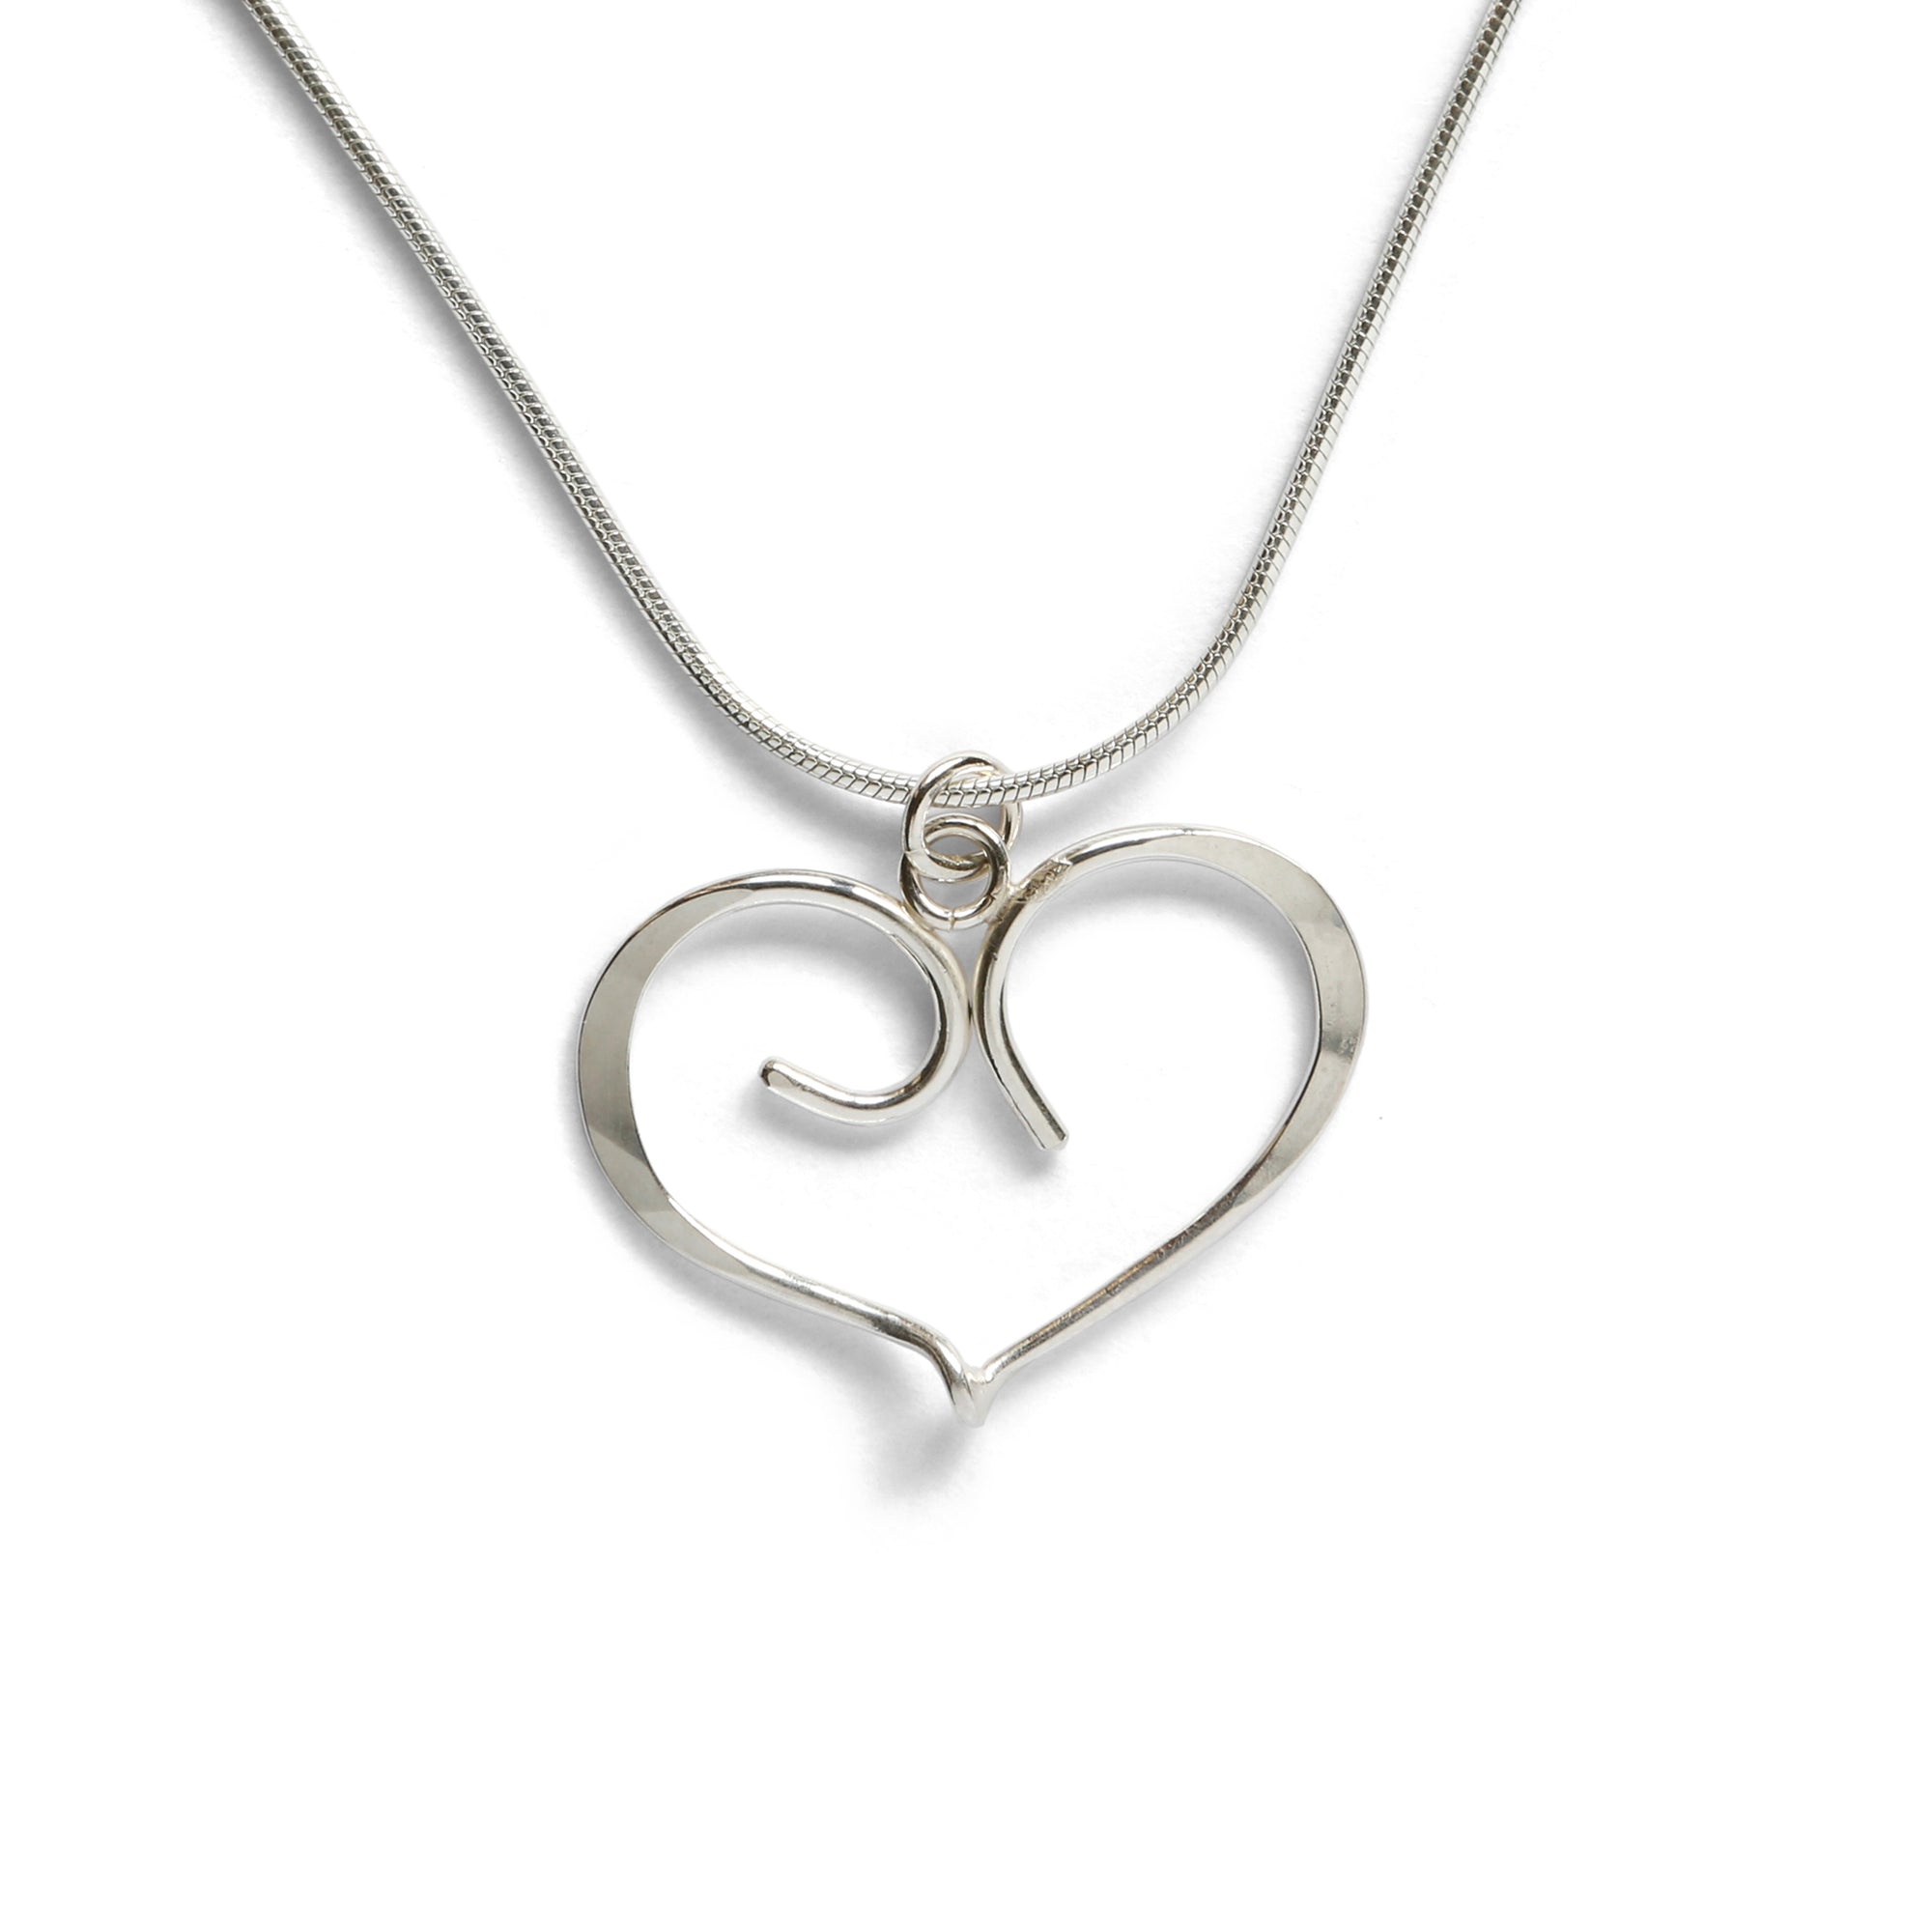 Forged Heart Necklace